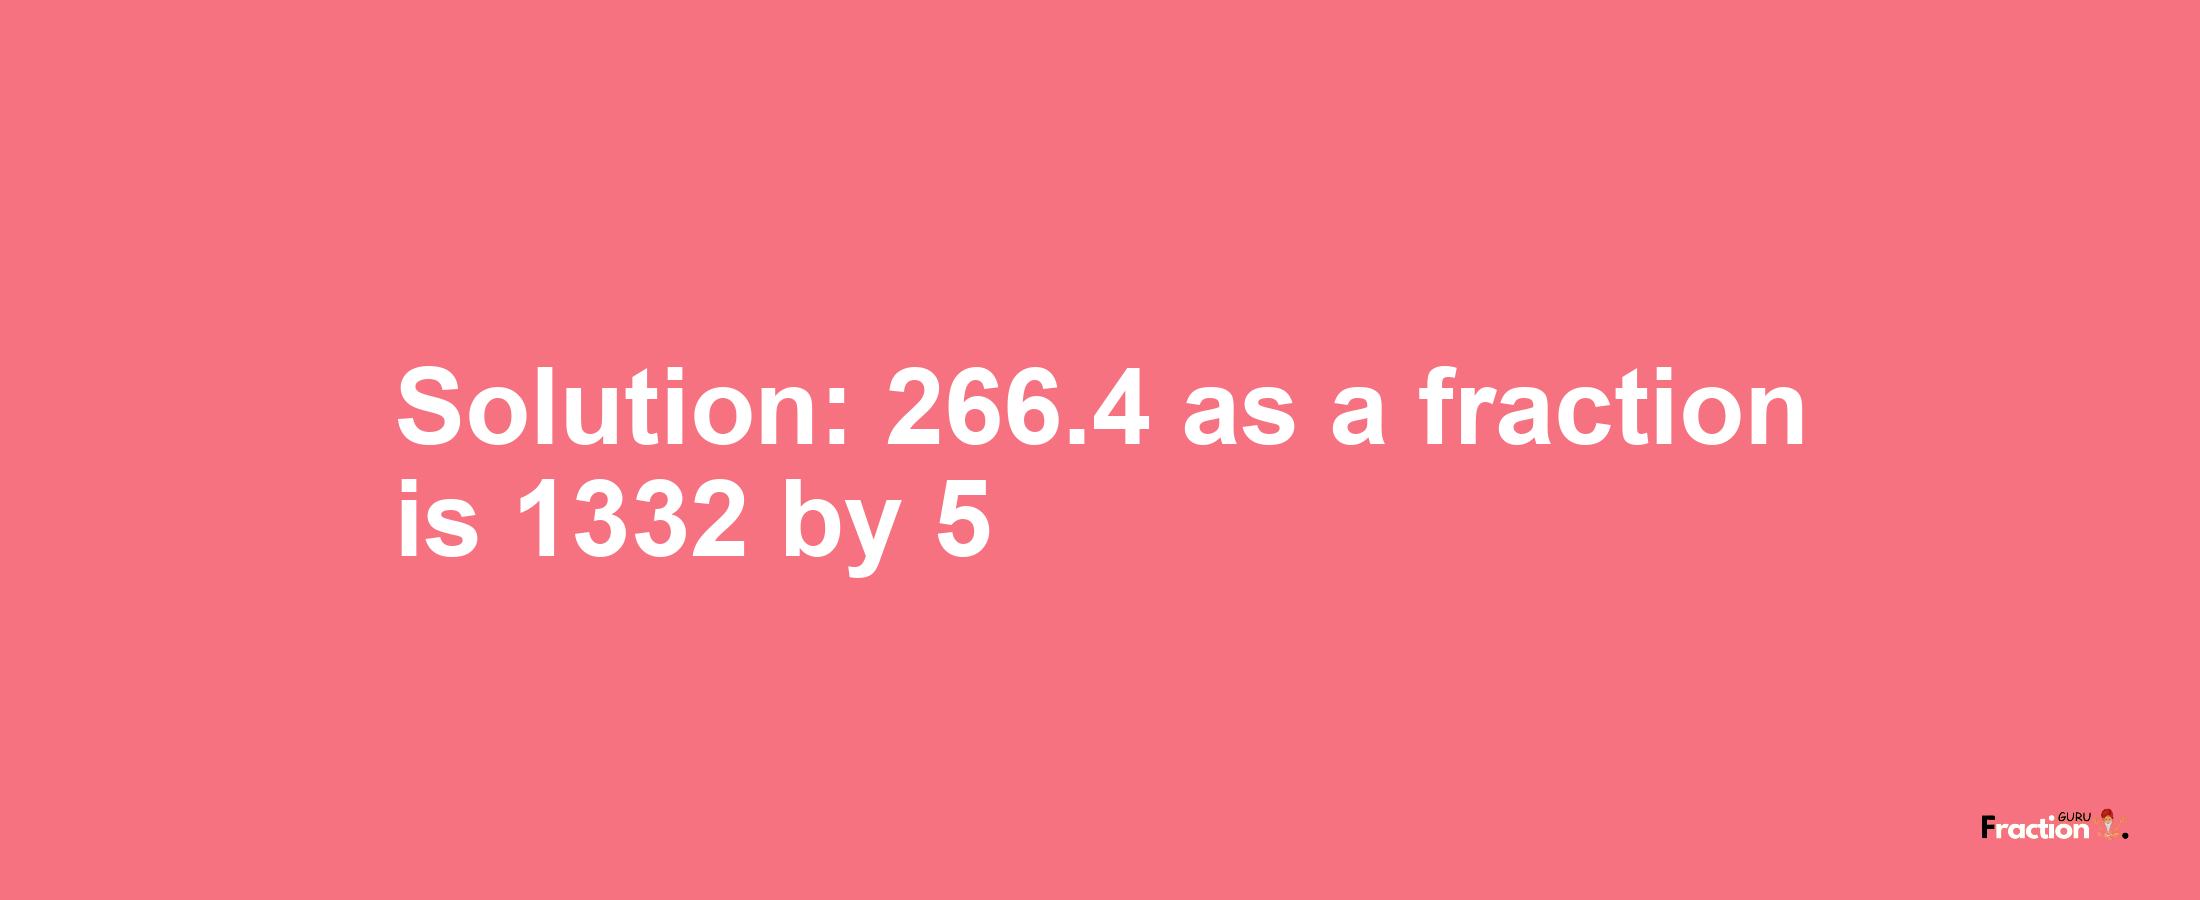 Solution:266.4 as a fraction is 1332/5